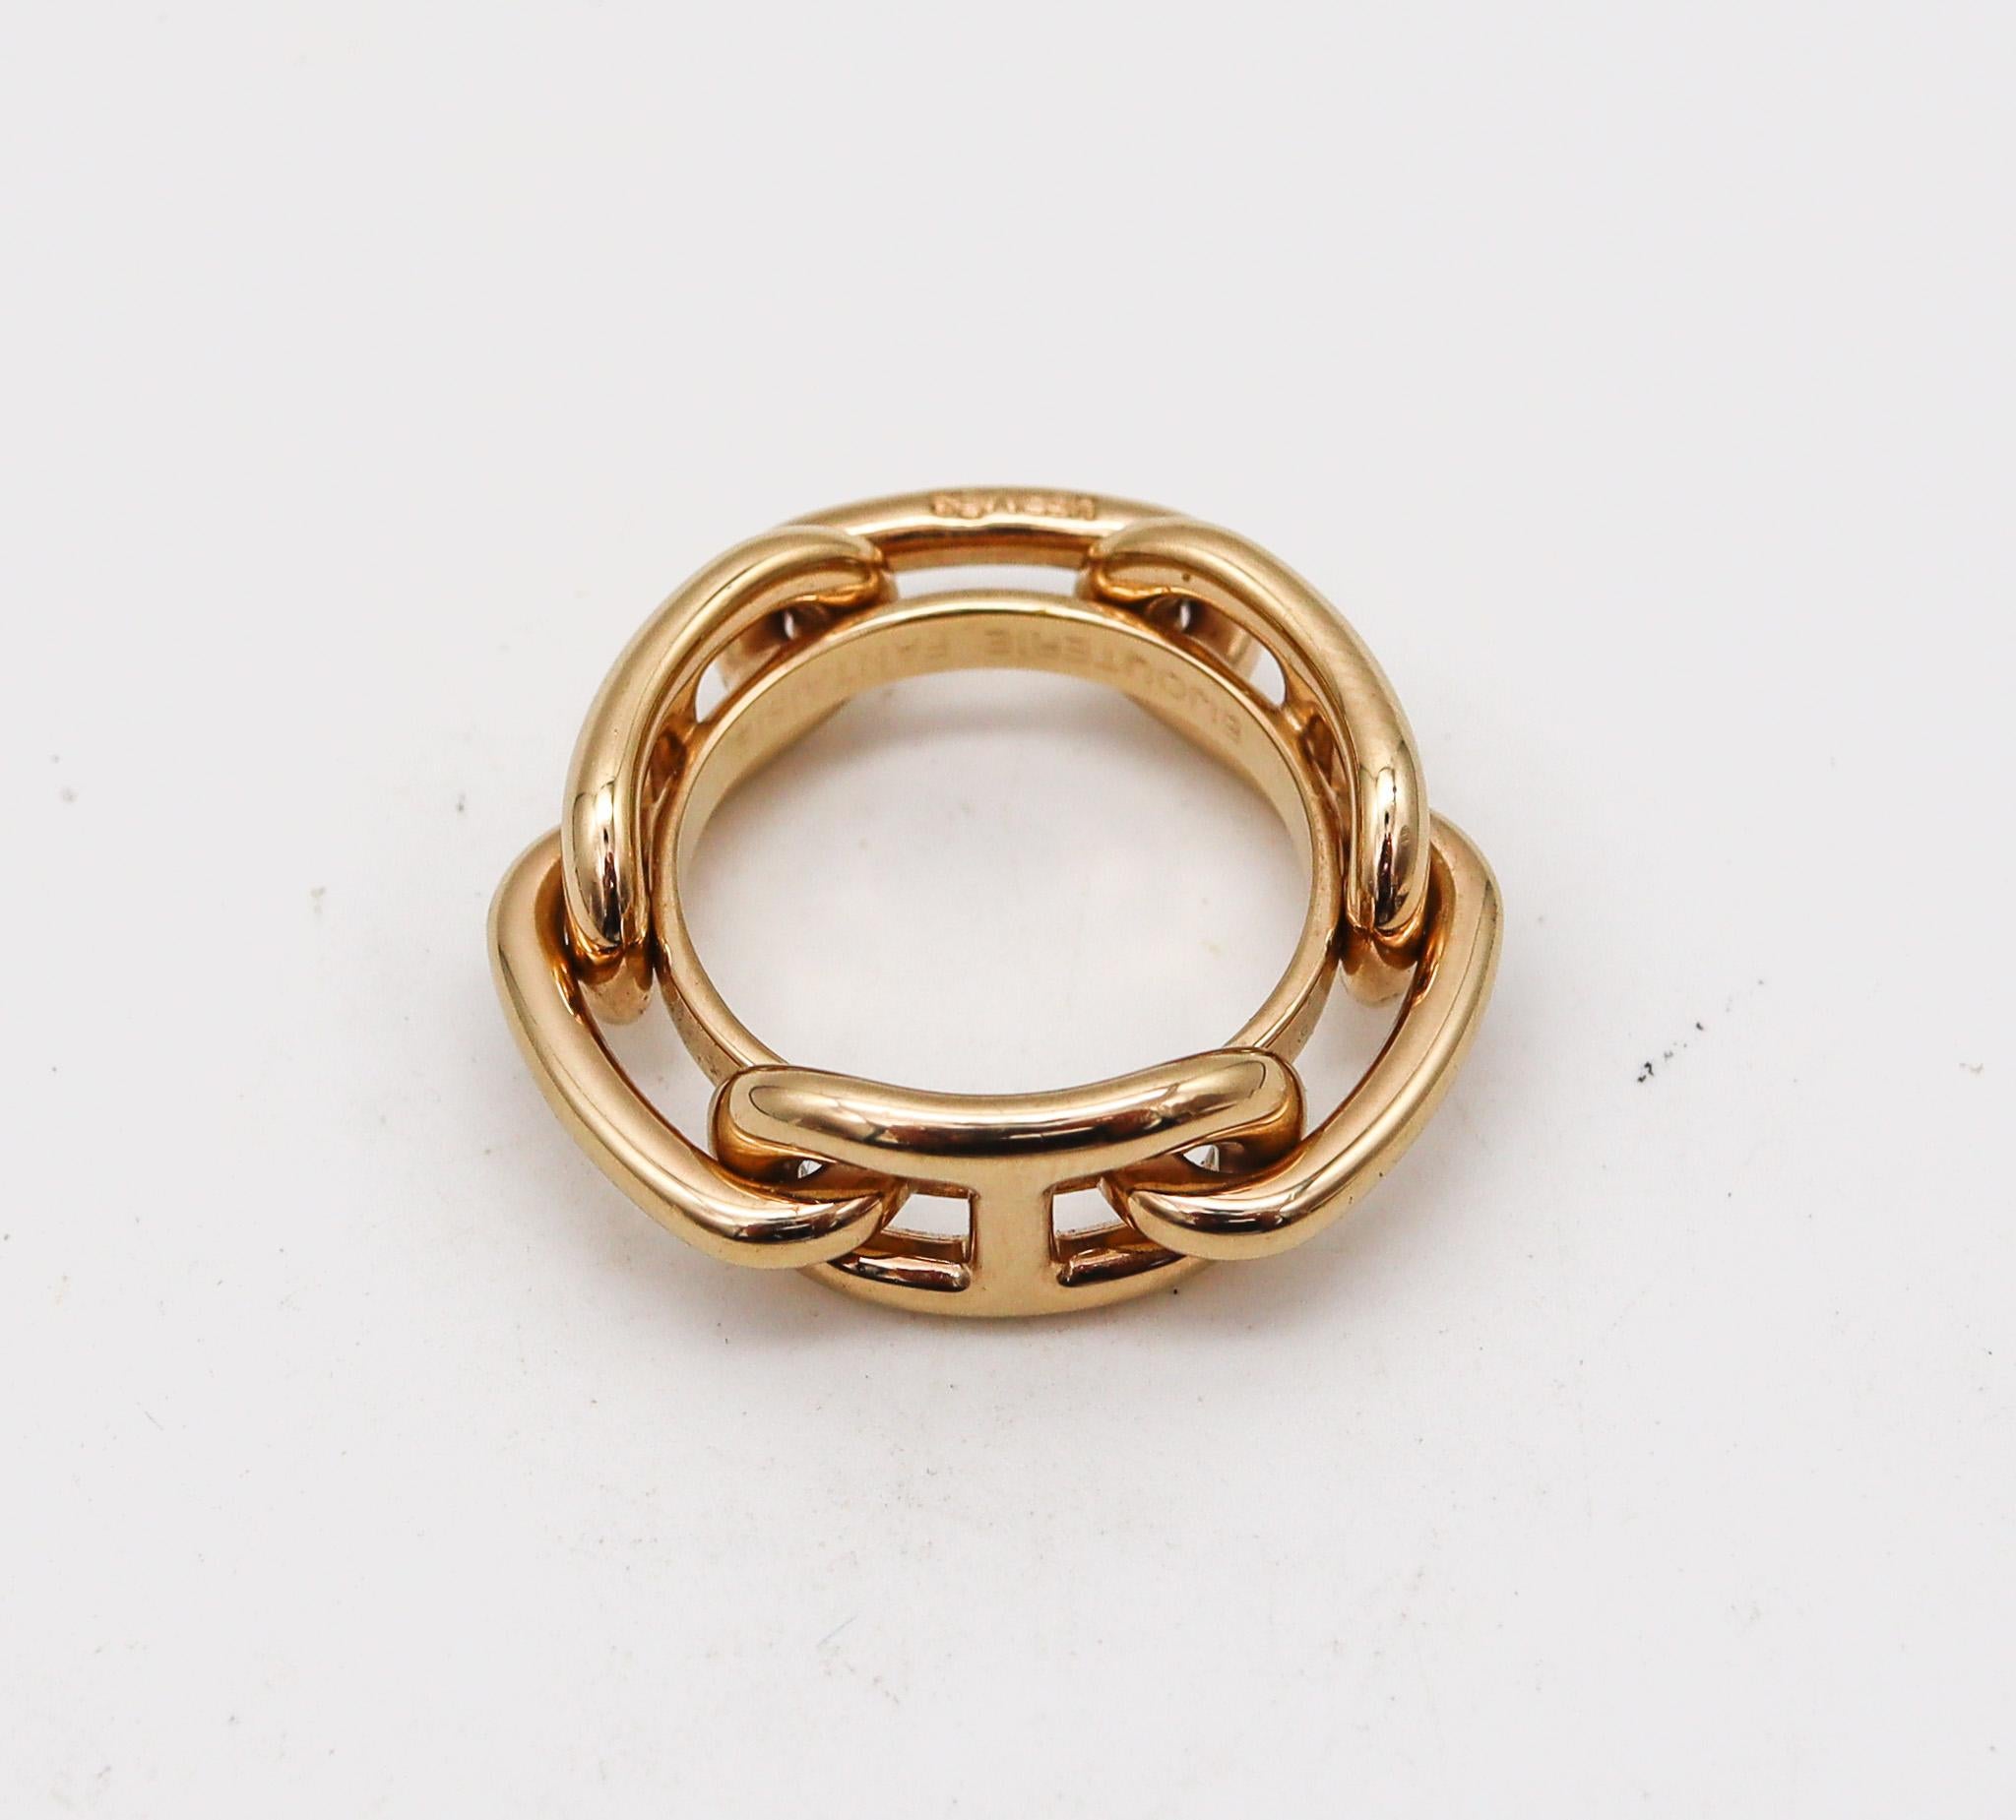 Hermes Paris Vintage Chain D'Ancre Scarf Ring In 18Kt Yellow Gold Plated In Box Excellent état à Miami, FL